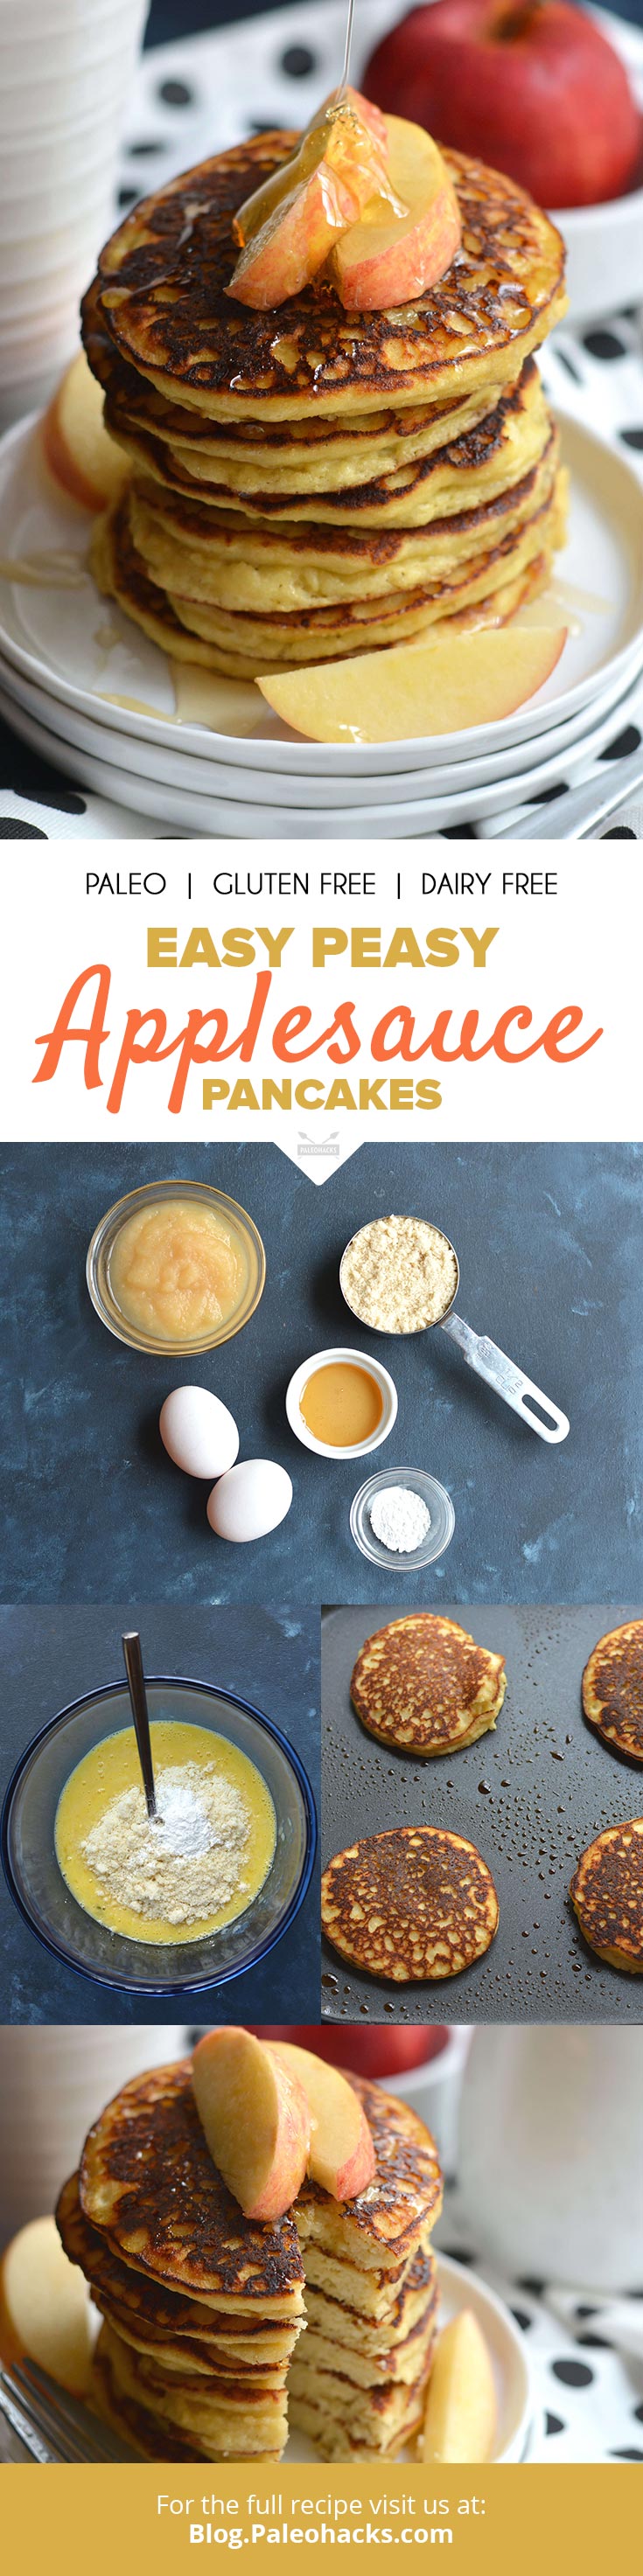 These nutritious applesauce pancakes are made with almond flour, and they’re guaranteed to keep you full all morning! Very important for creating satiety.